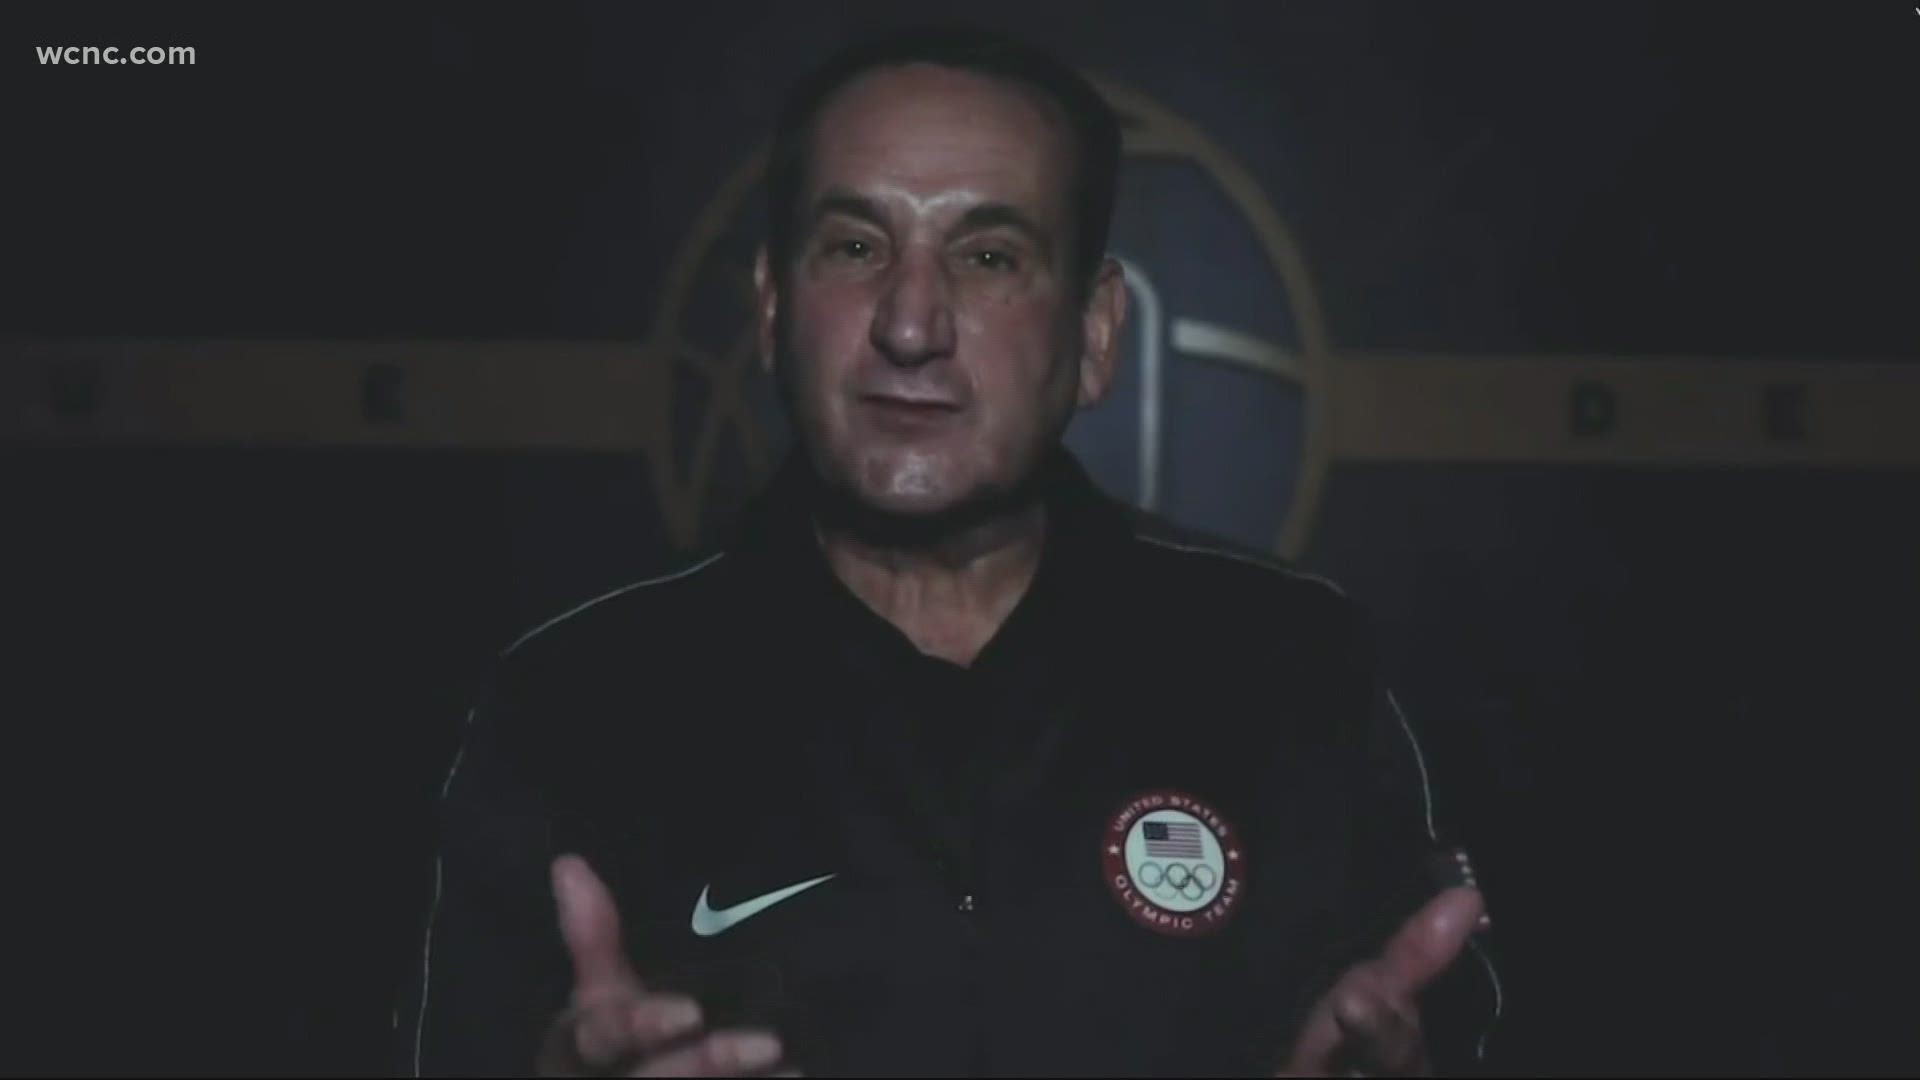 The coach posted a video to his Twitter account.